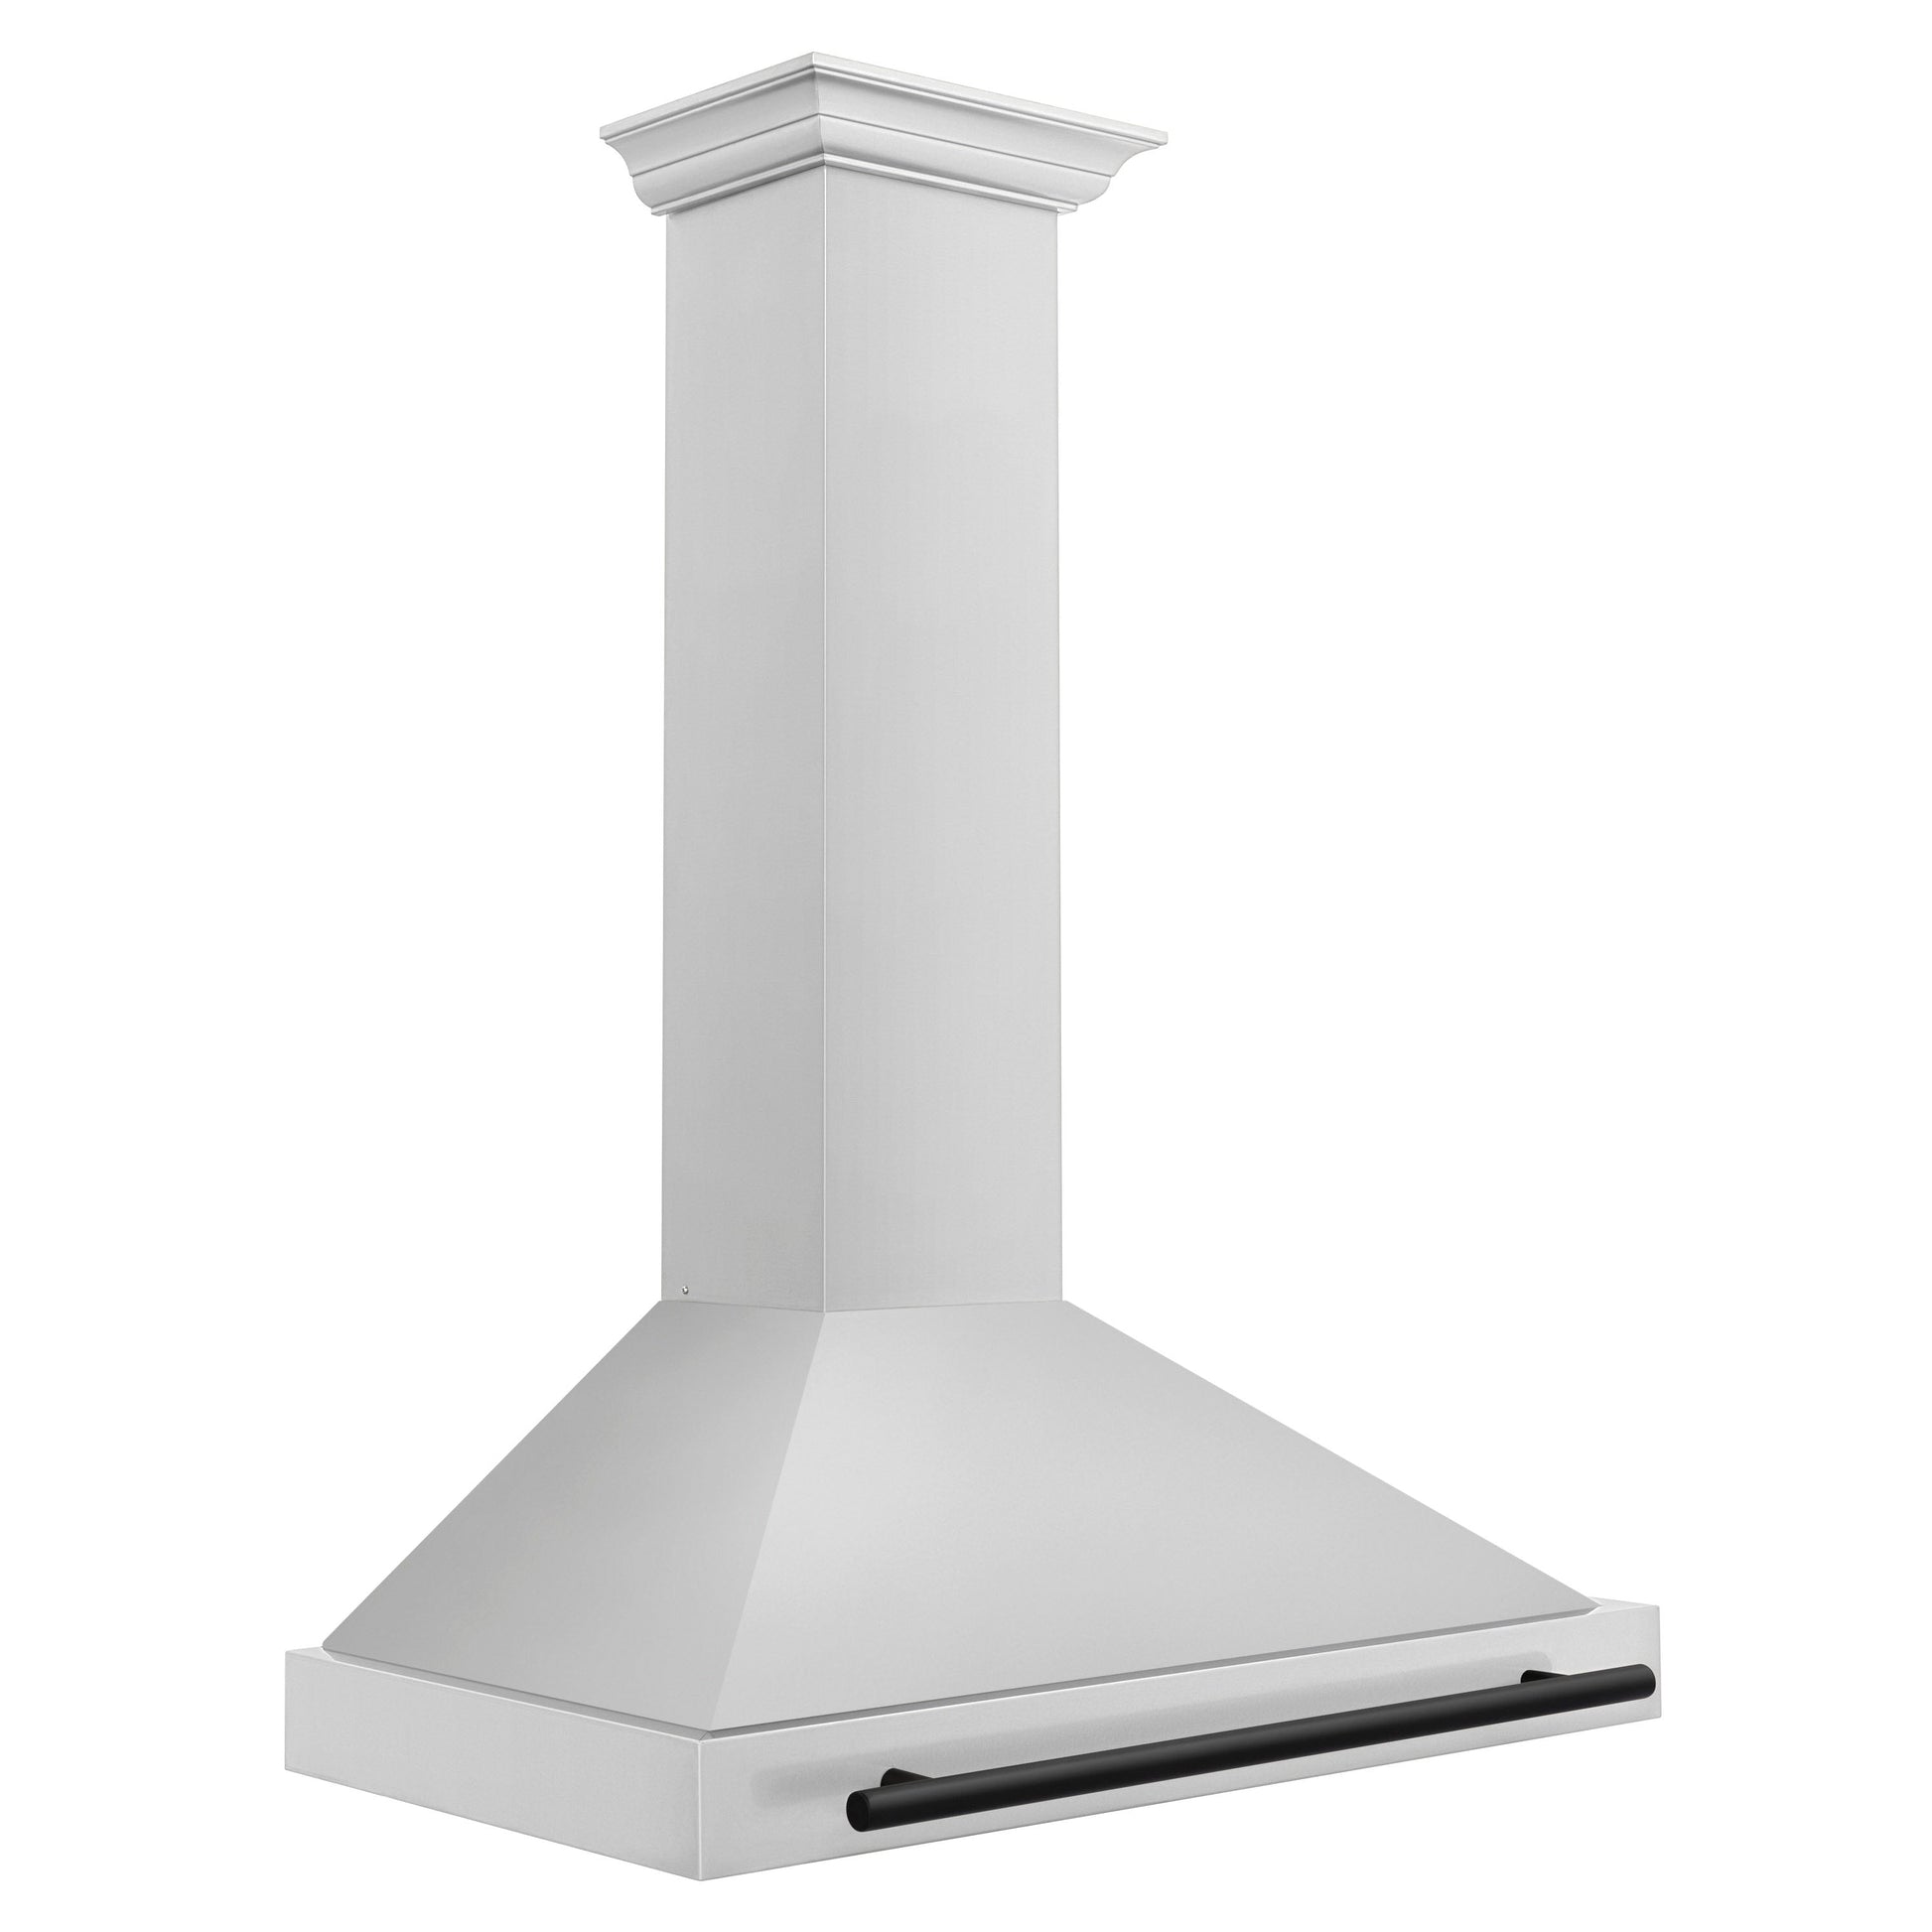 ZLINE 36" Autograph Edition Range Hood - Stainless Steel with Shell and Accents